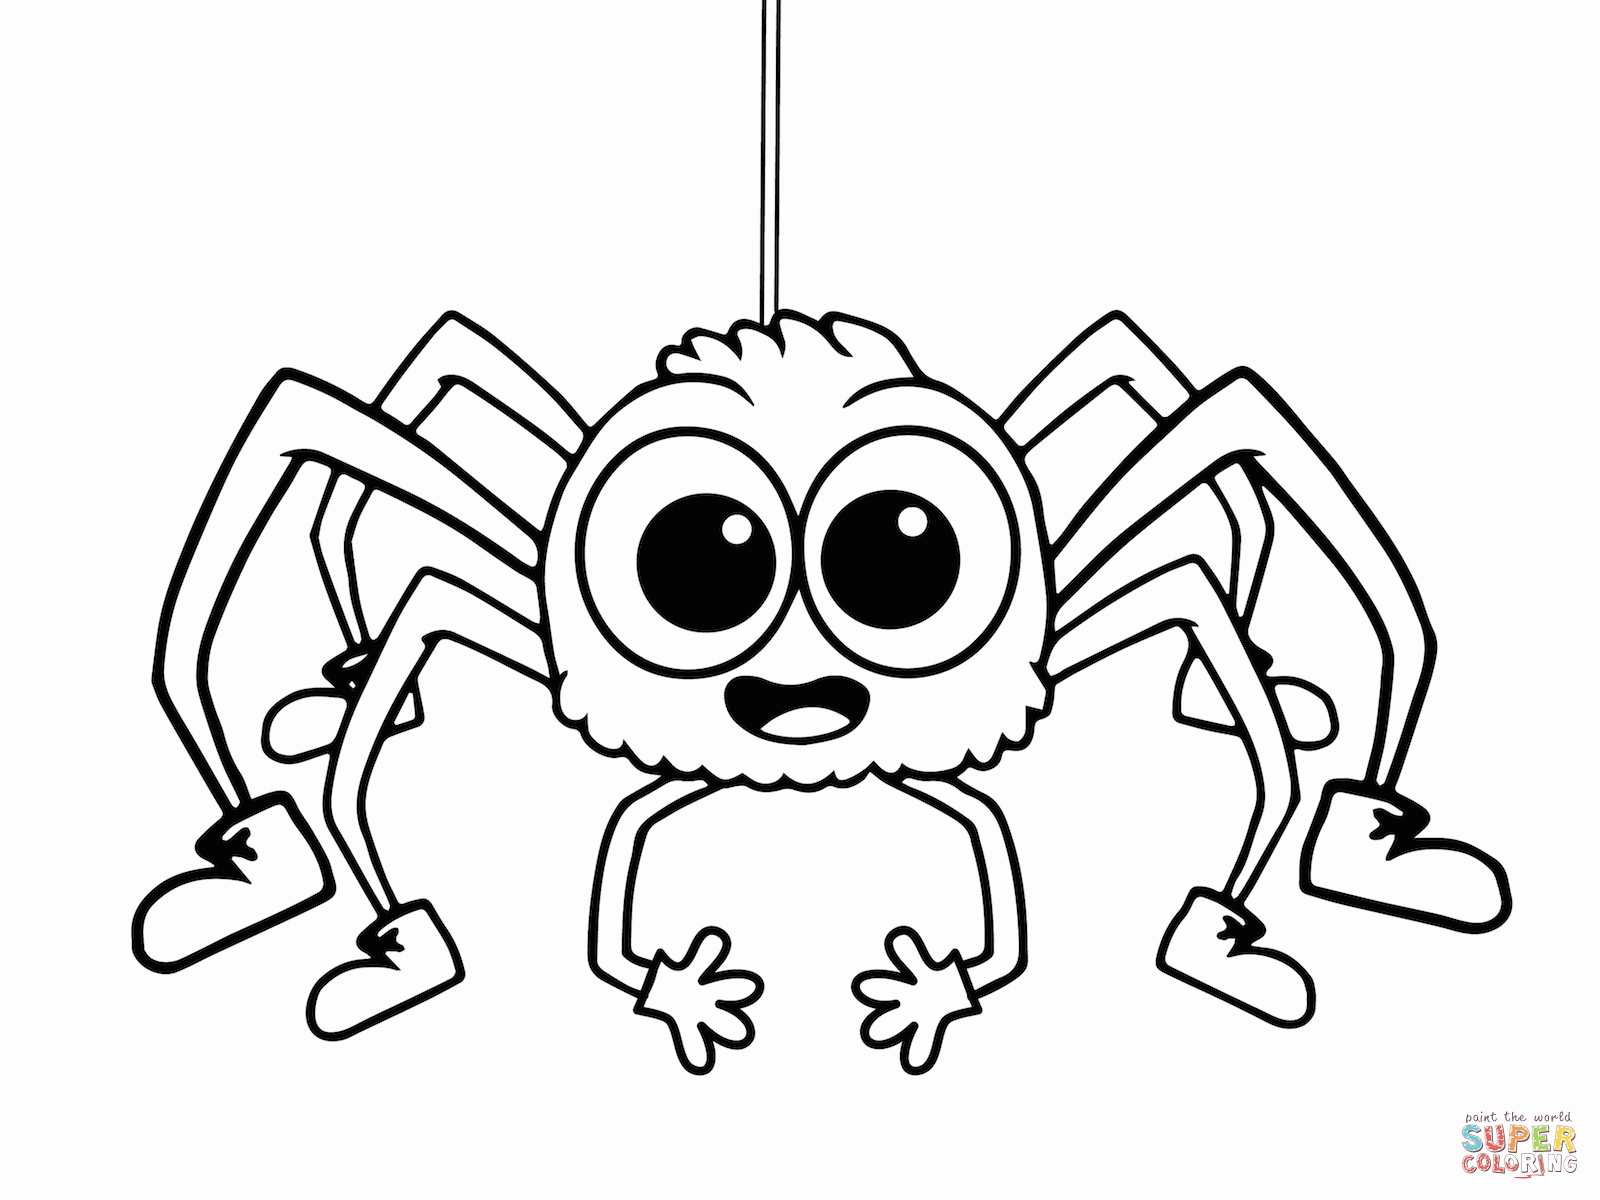 free-spider-coloring-pages-printable-download-free-spider-coloring